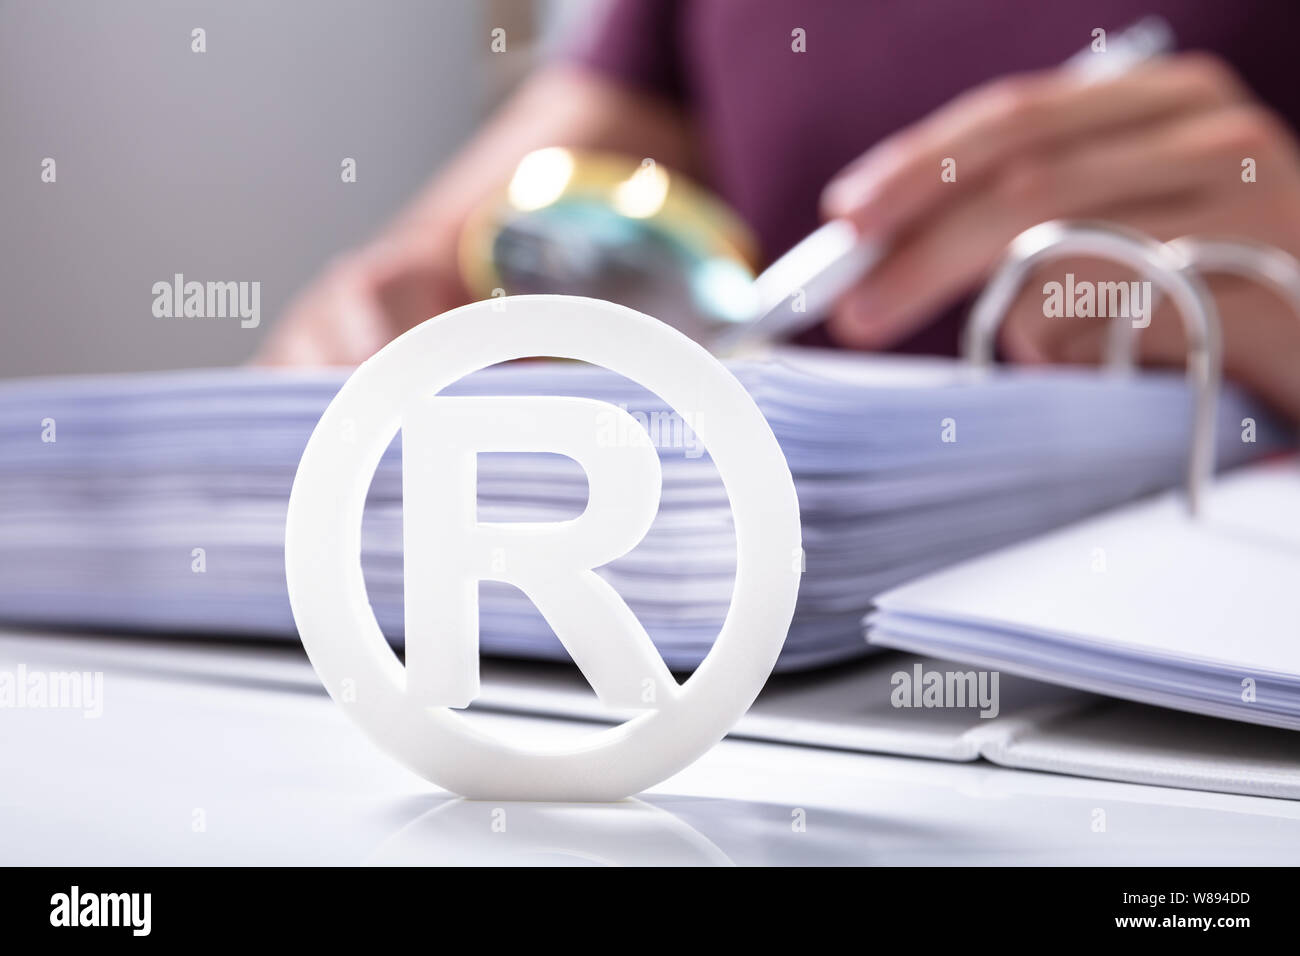 Close-up Of White Registered Trademark Sign Near Documents Over Desk Stock Photo